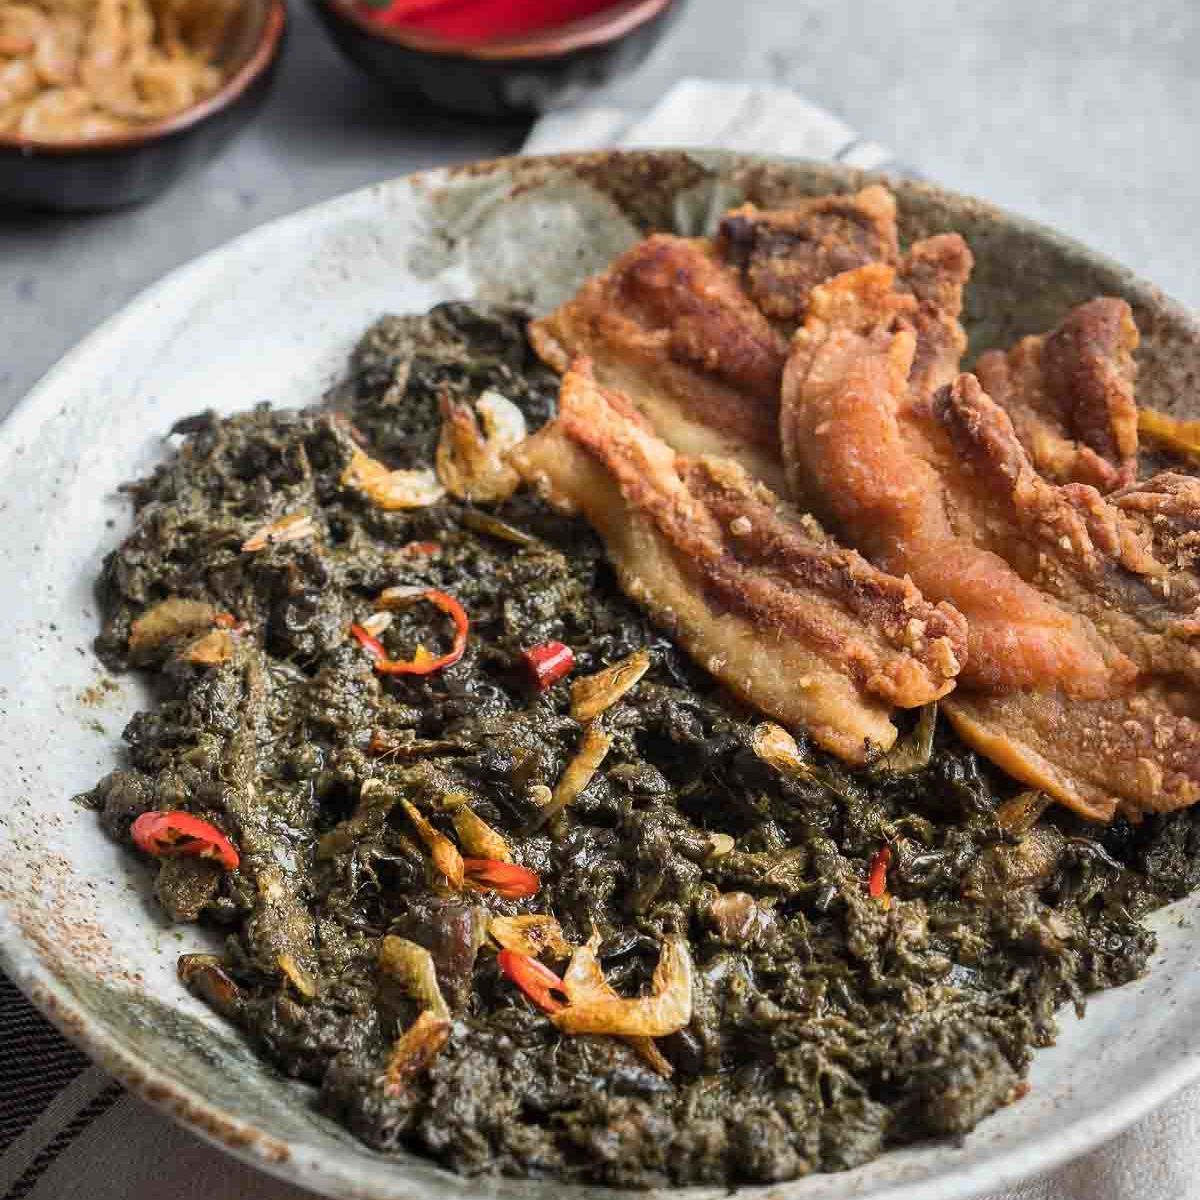 Laing with Pork